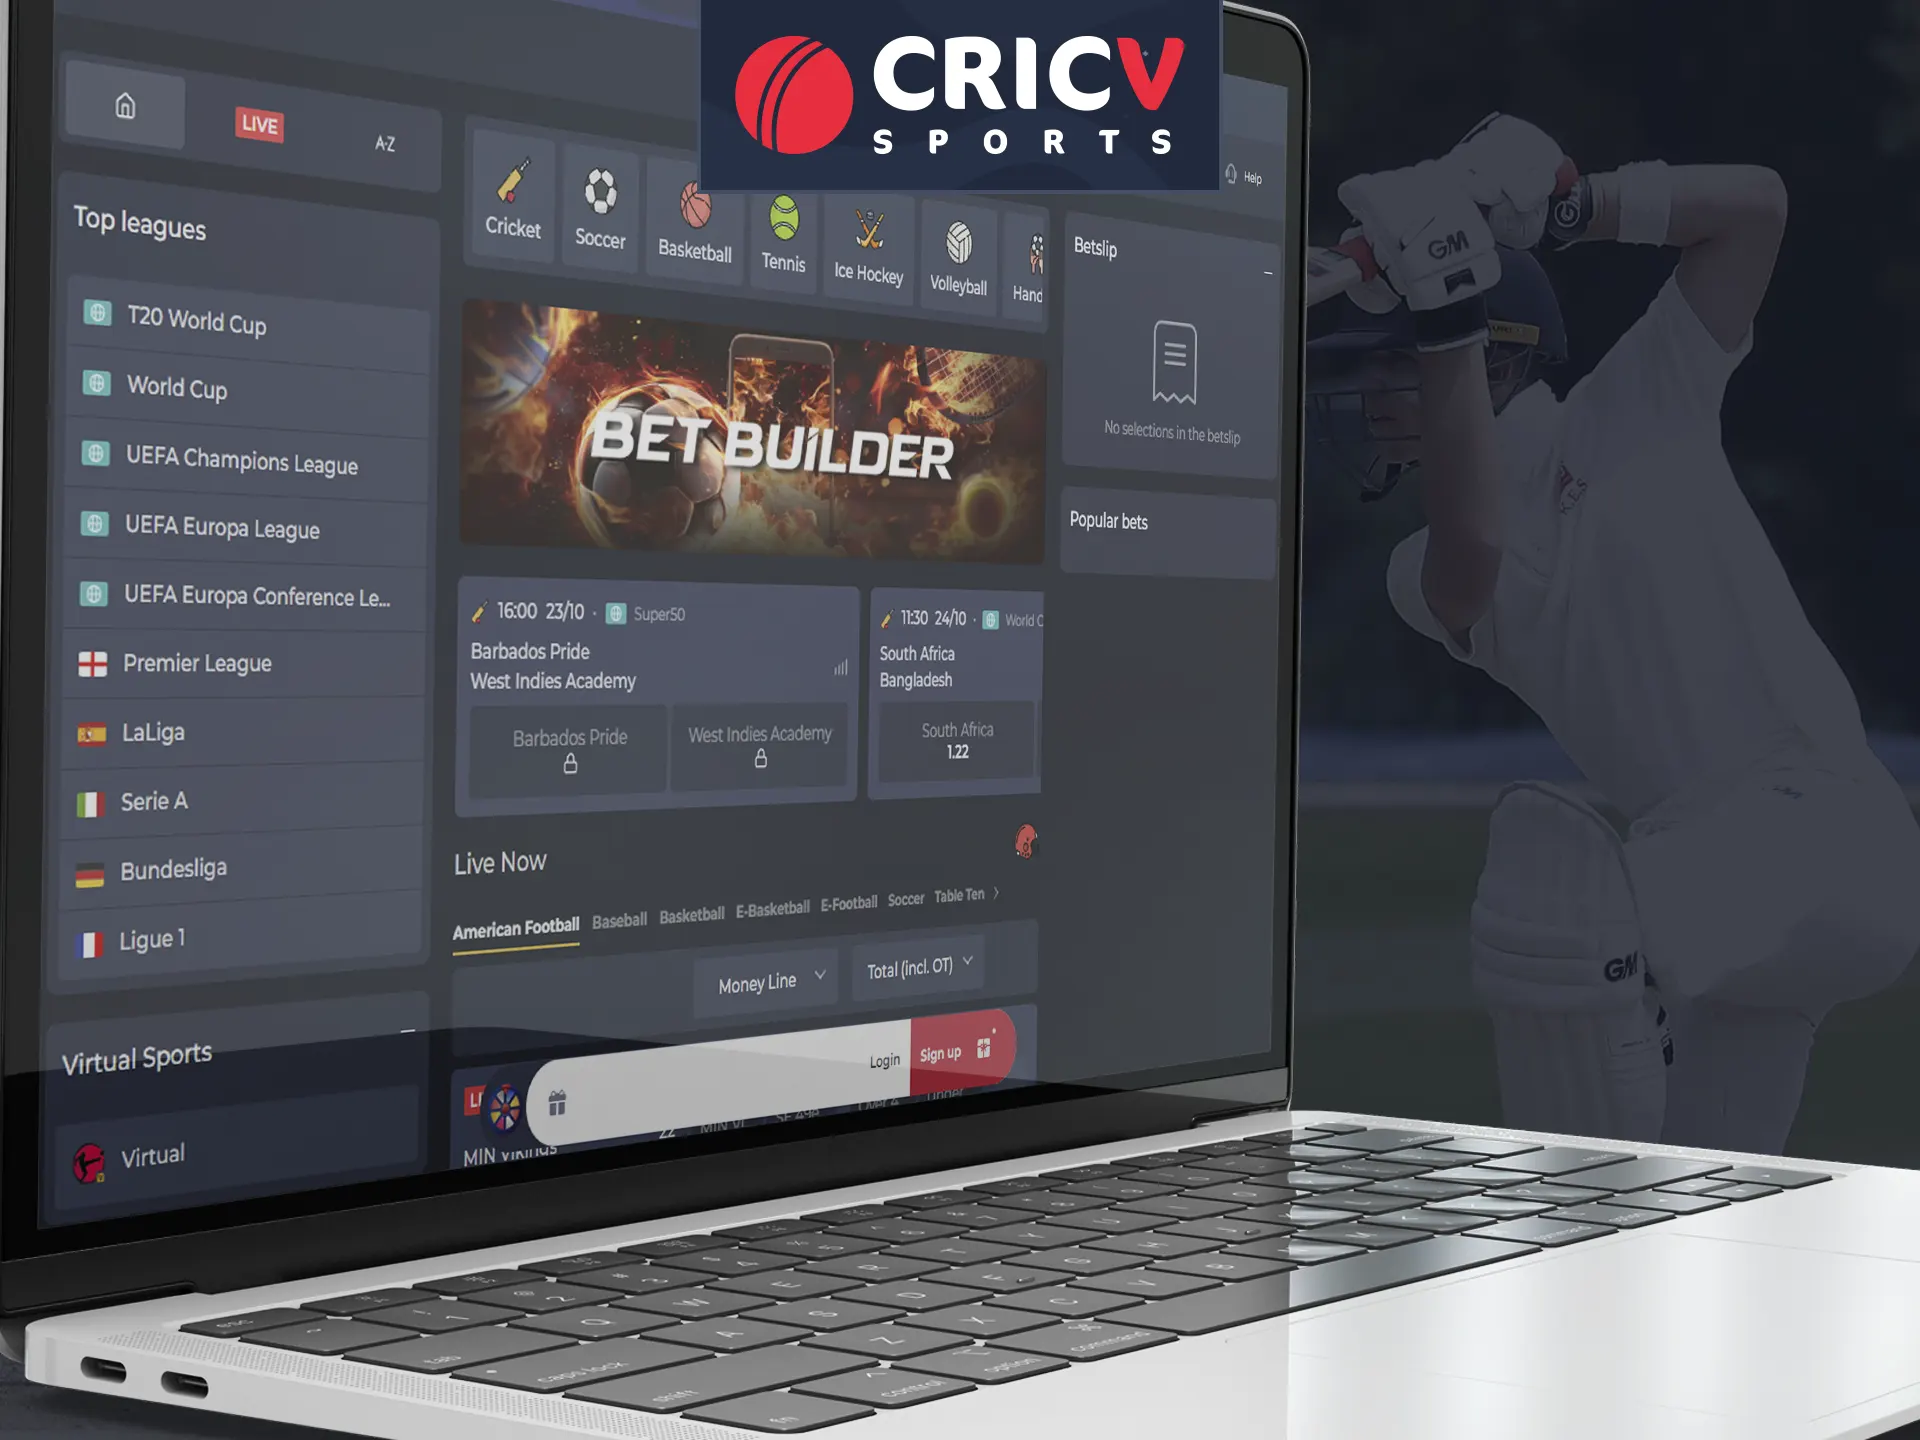 Familiarise yourself with all sections of the Cricv website.